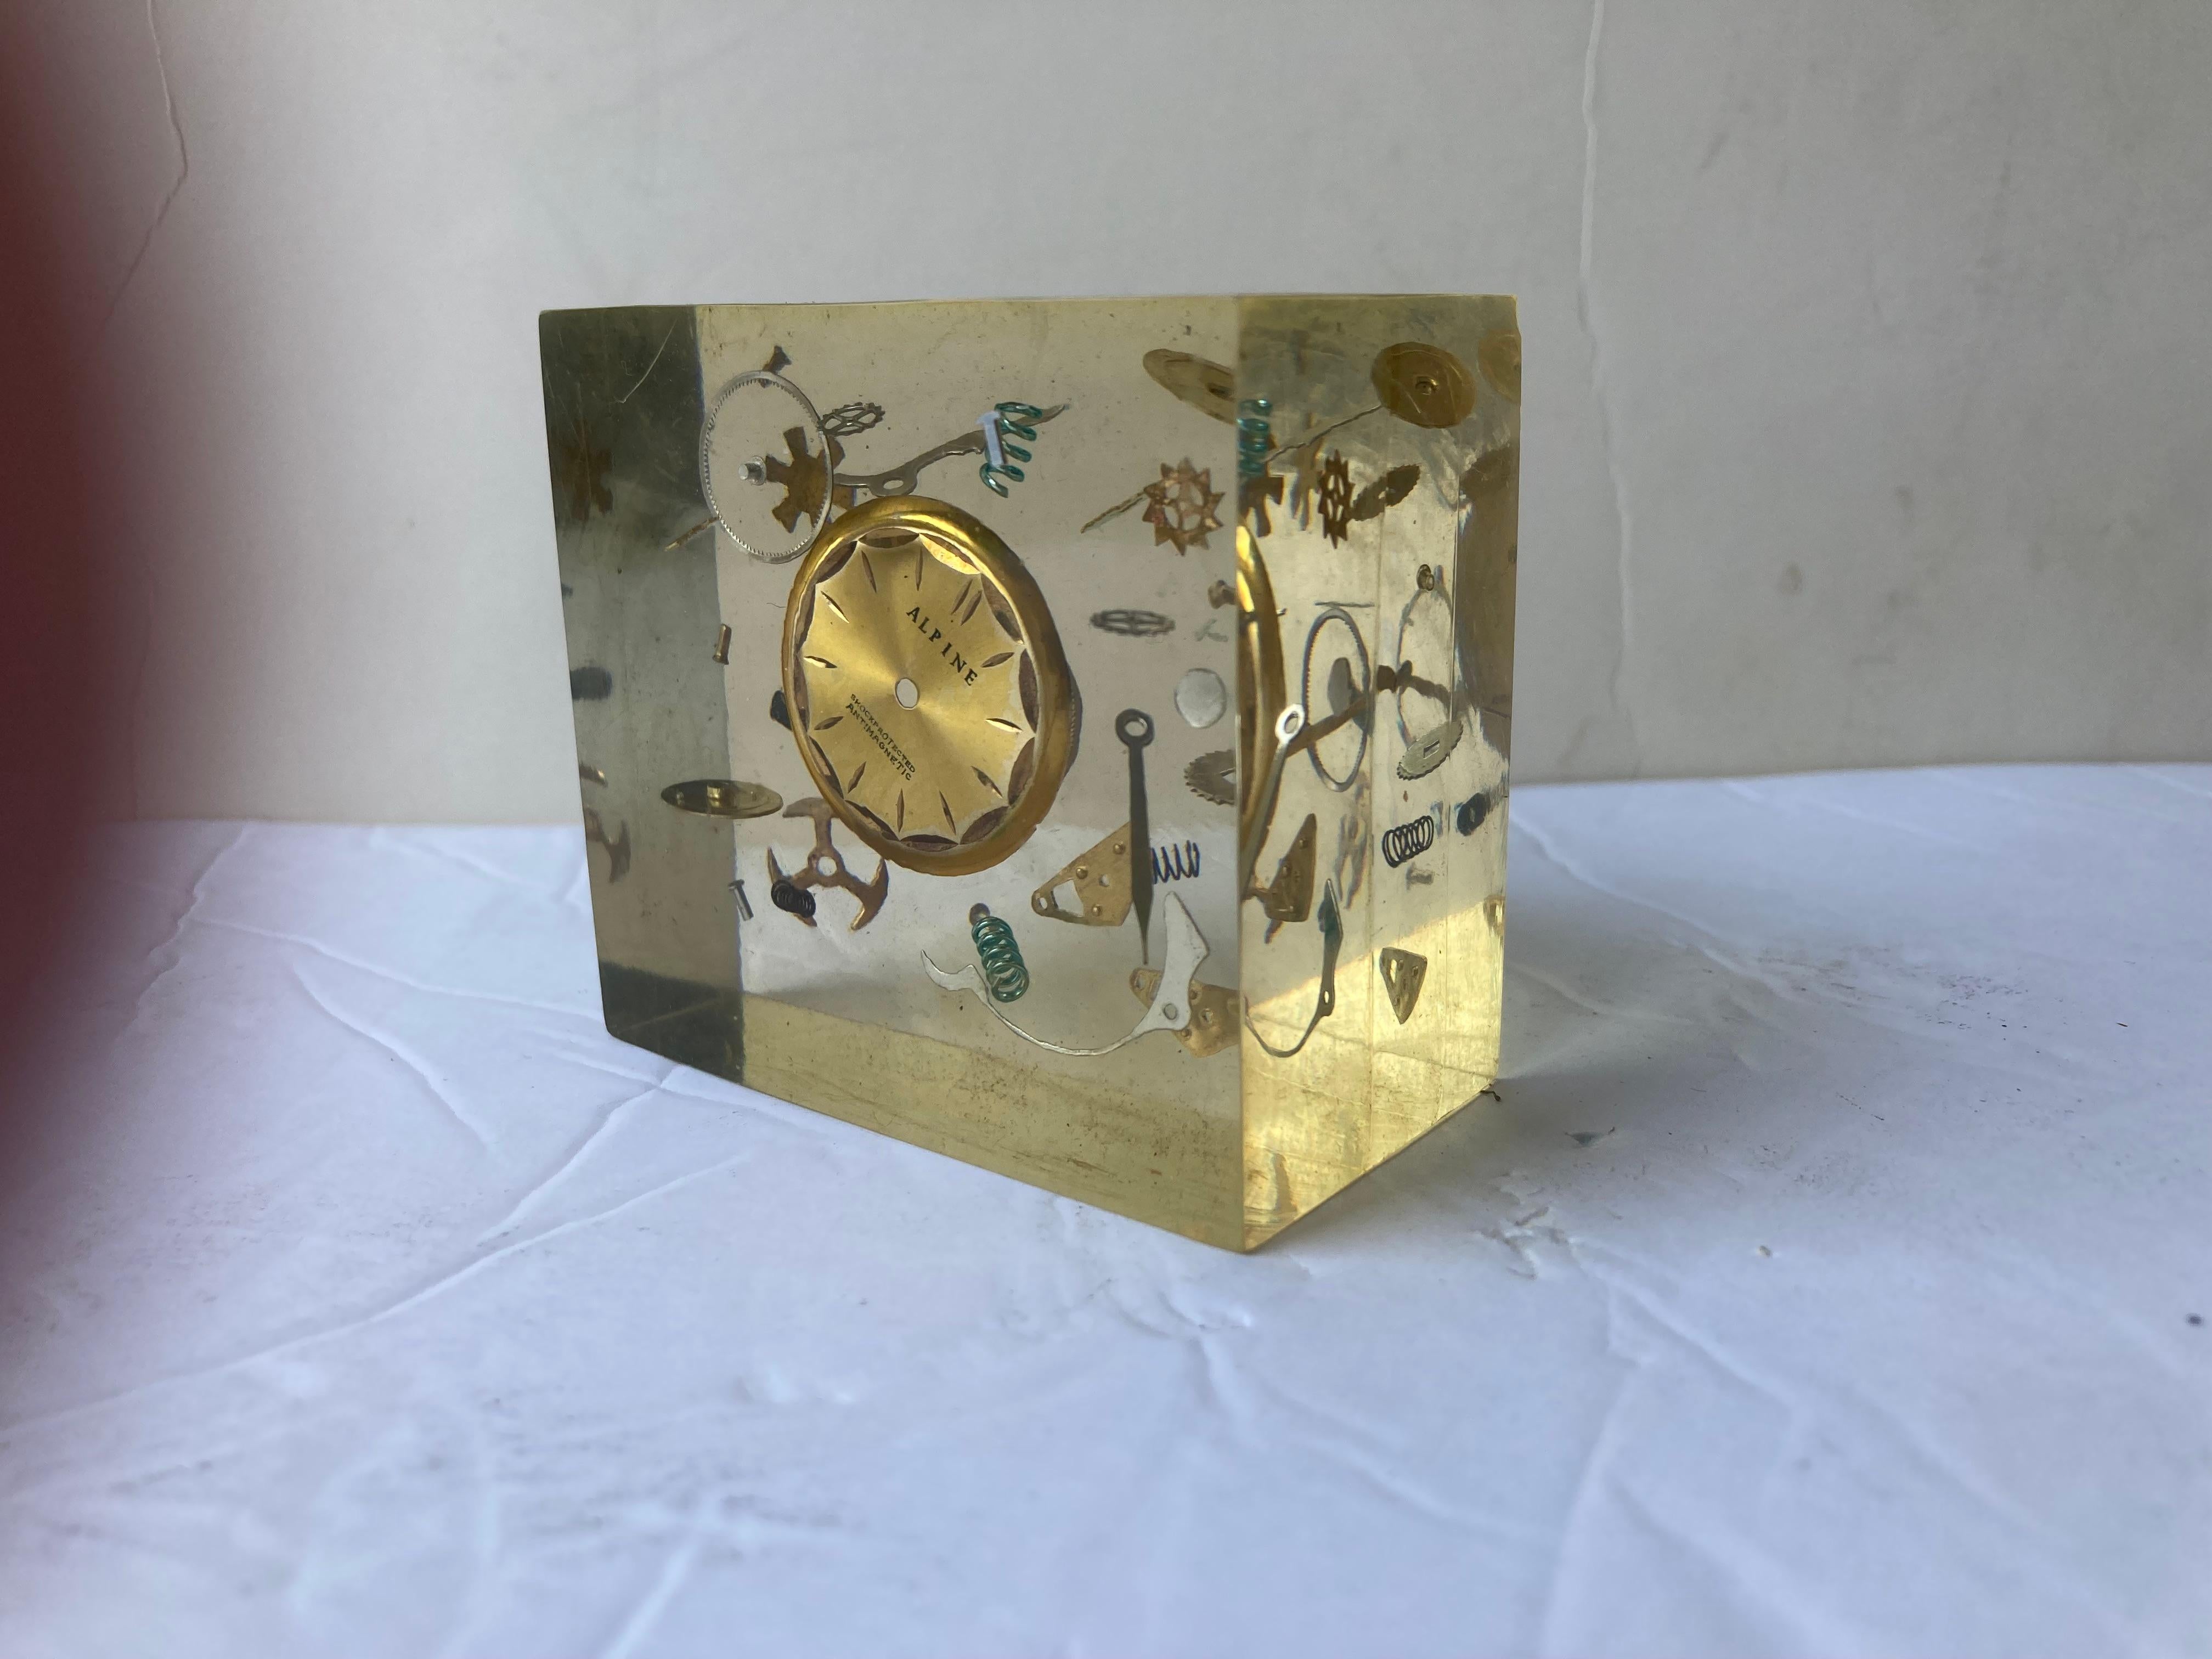 Beautiful sculpture in resin with clock parts inside.